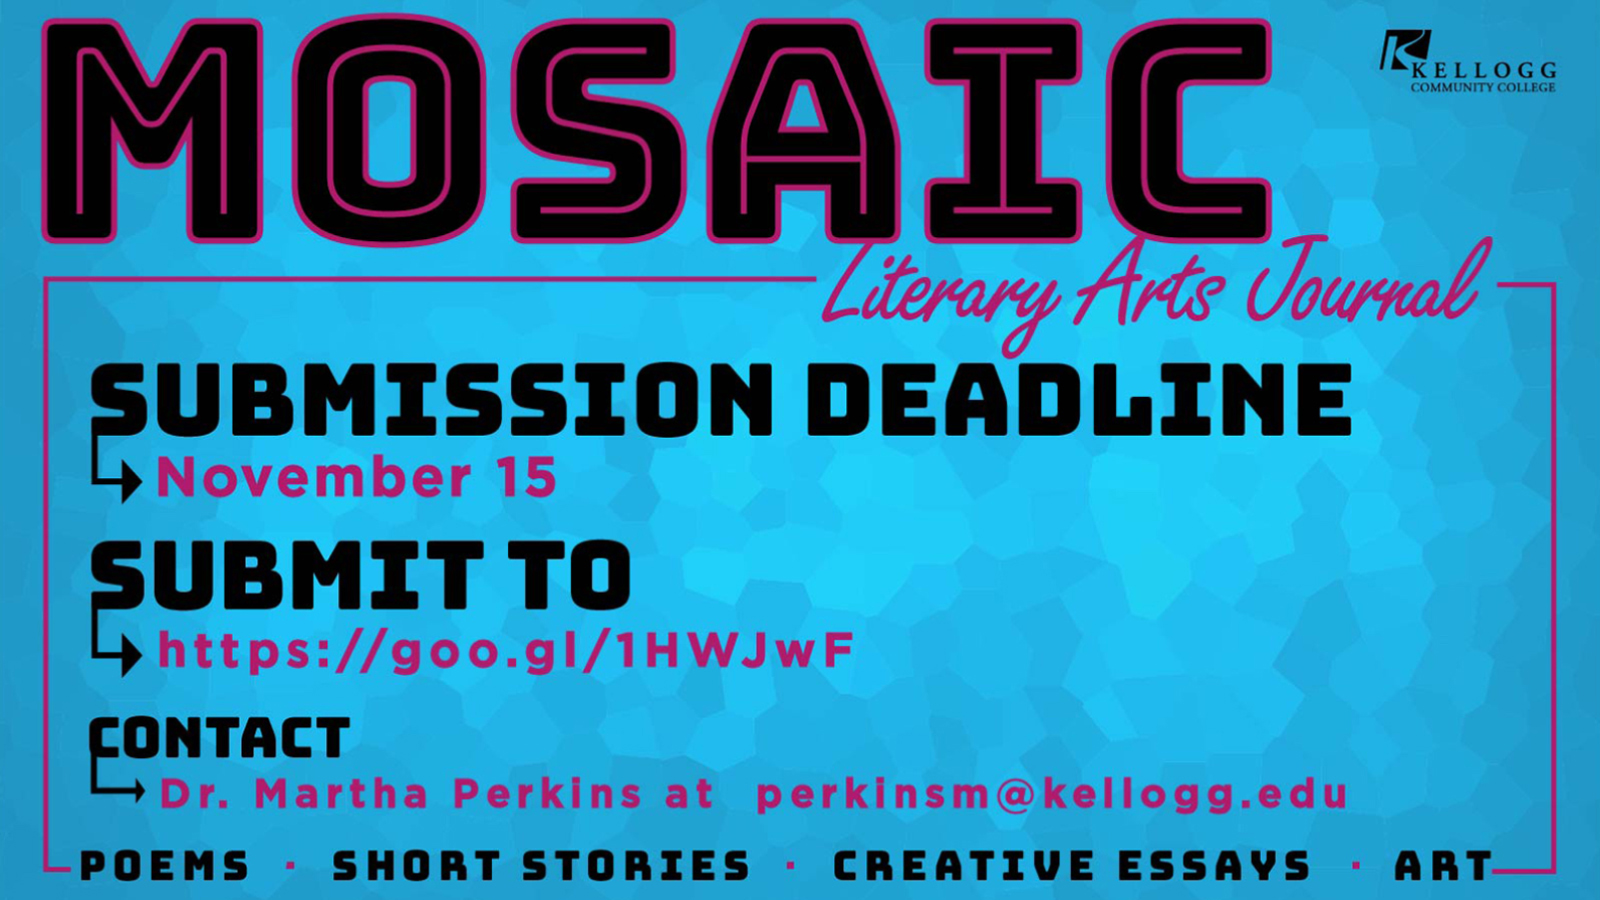 A text slide promoting the Nov. 15, 2018, submission deadline for the Mosaic student literary journal.